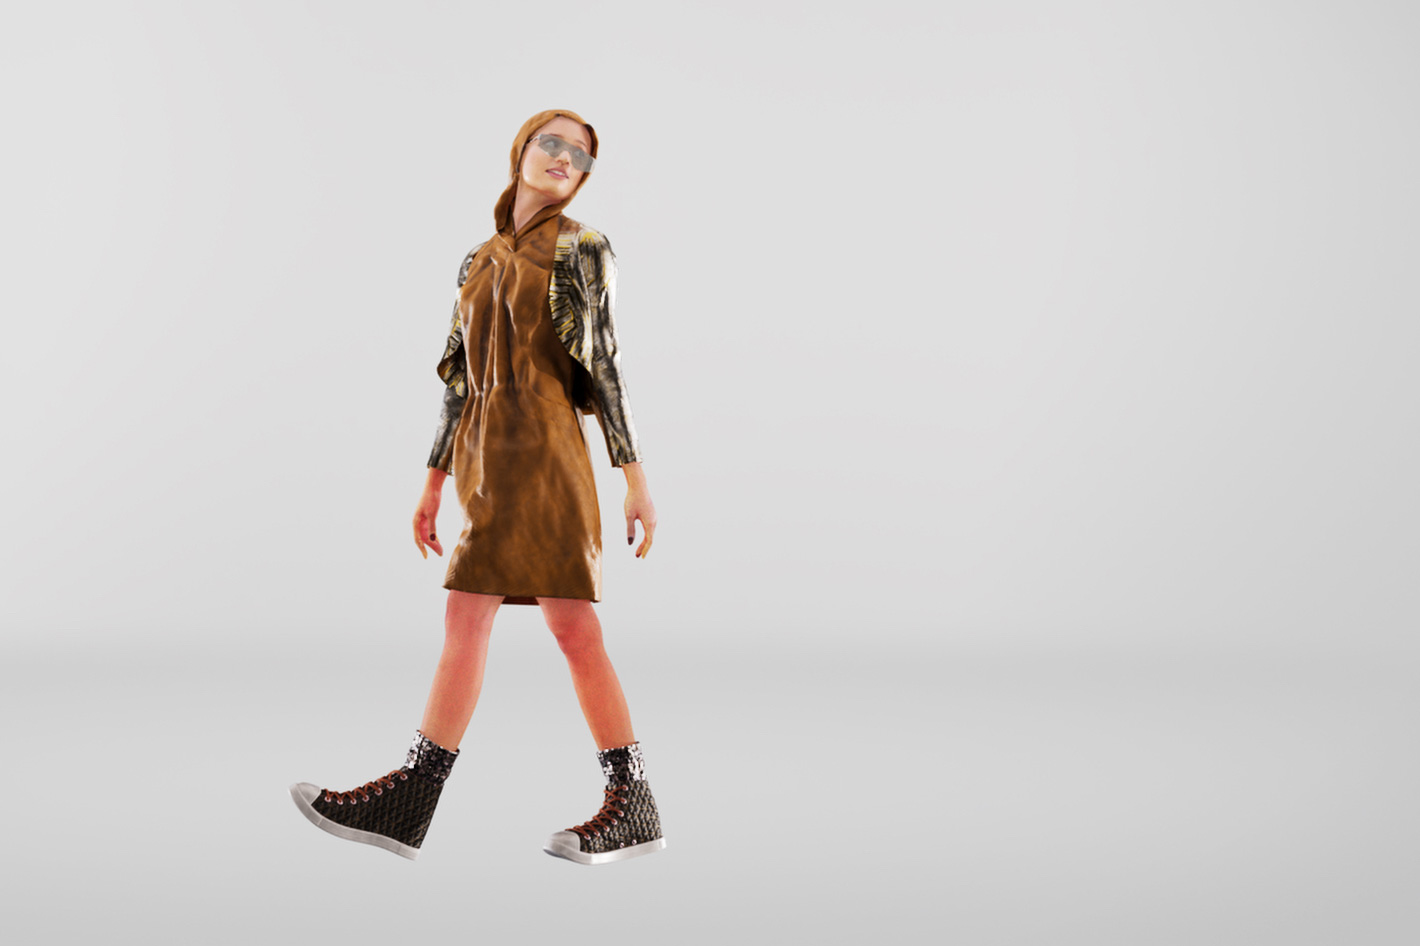 Wild Capture's technology delivers digital humans for fashion